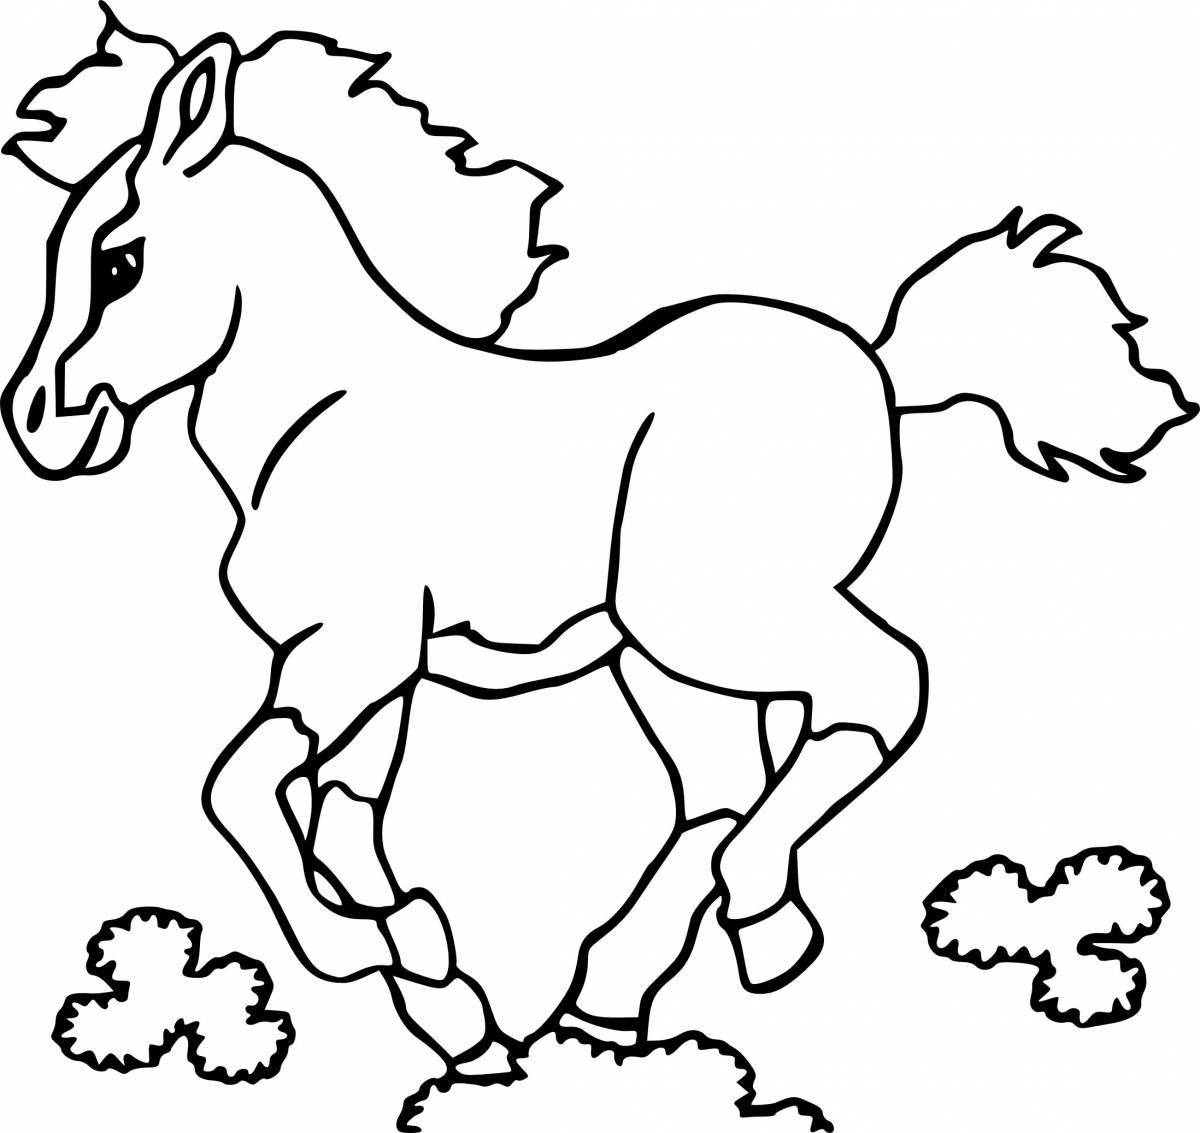 Color-mania horse coloring page for children 2-3 years old